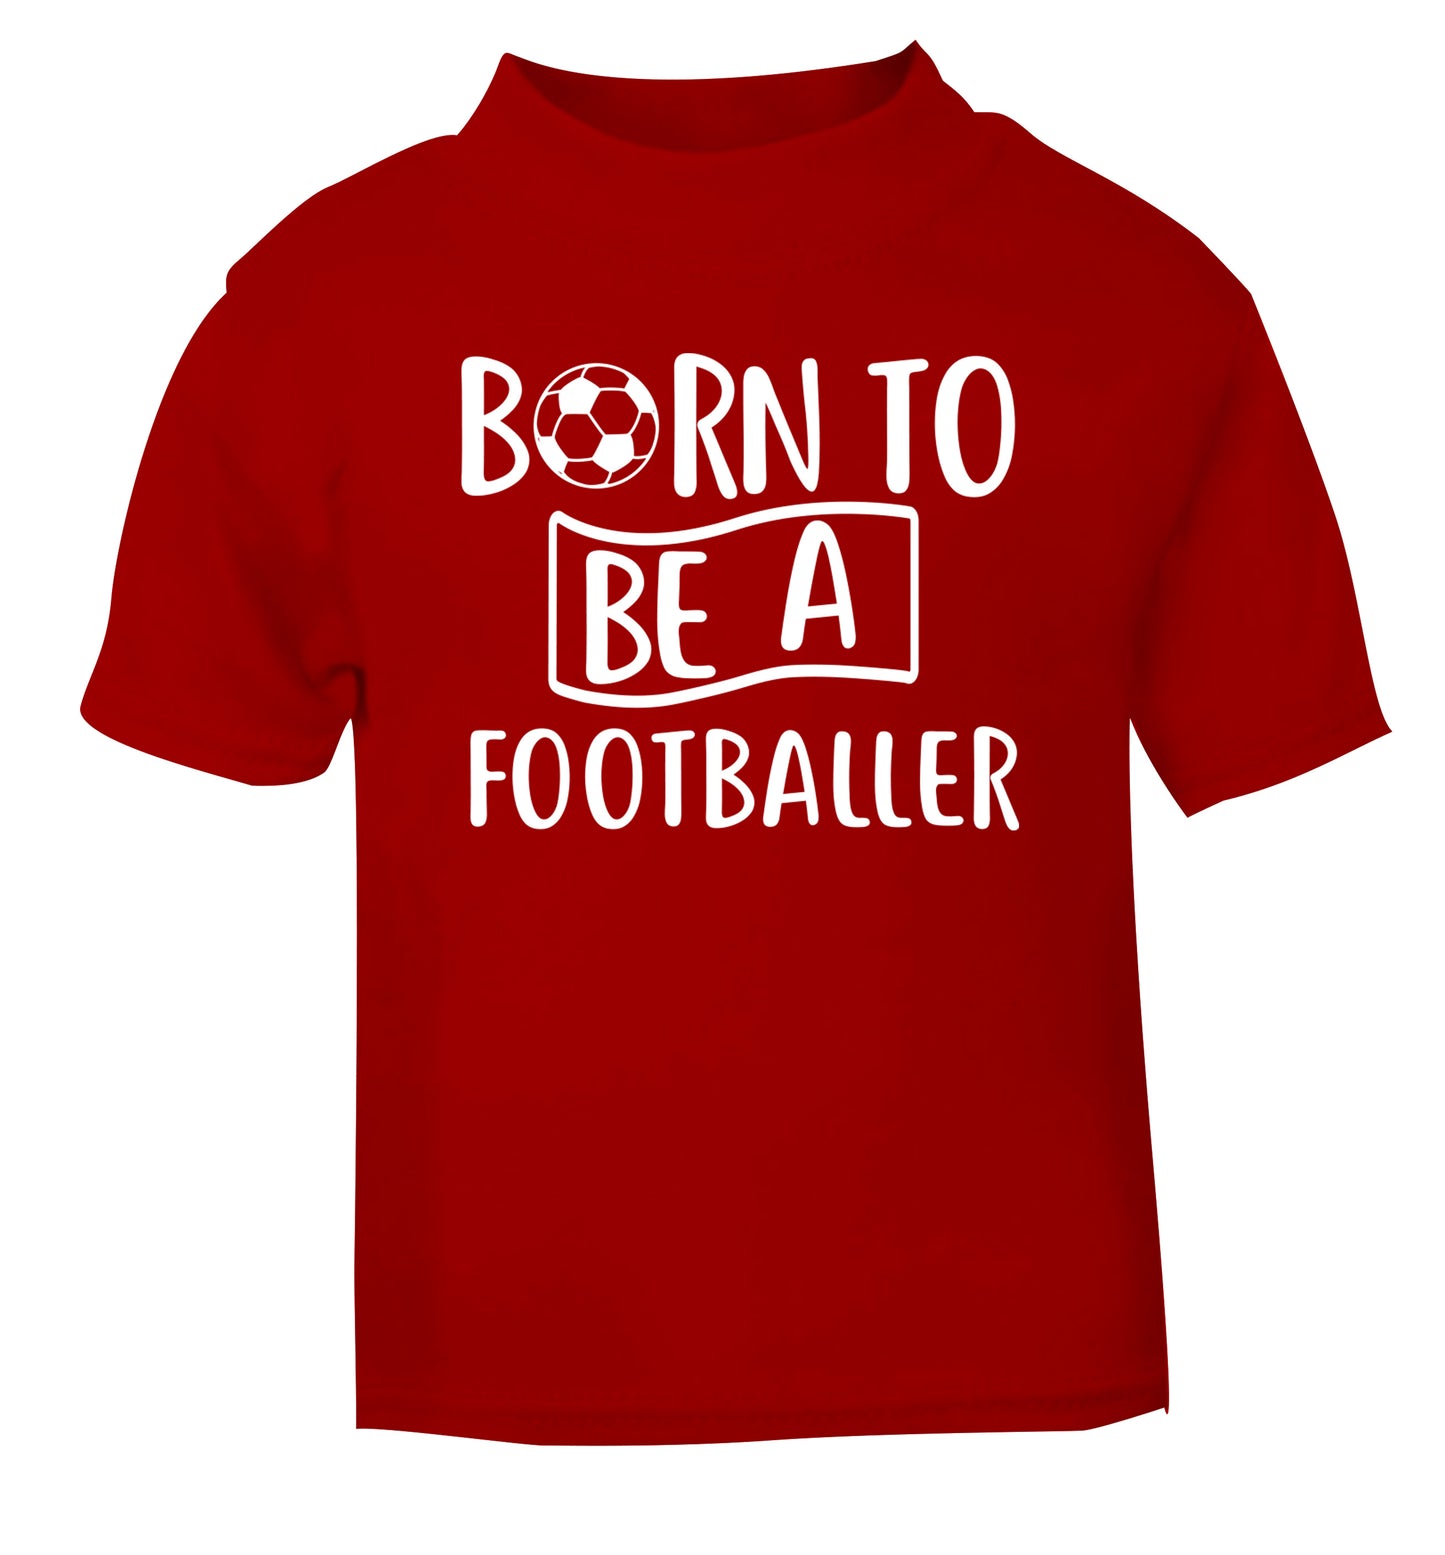 Born to be a footballer red Baby Toddler Tshirt 2 Years